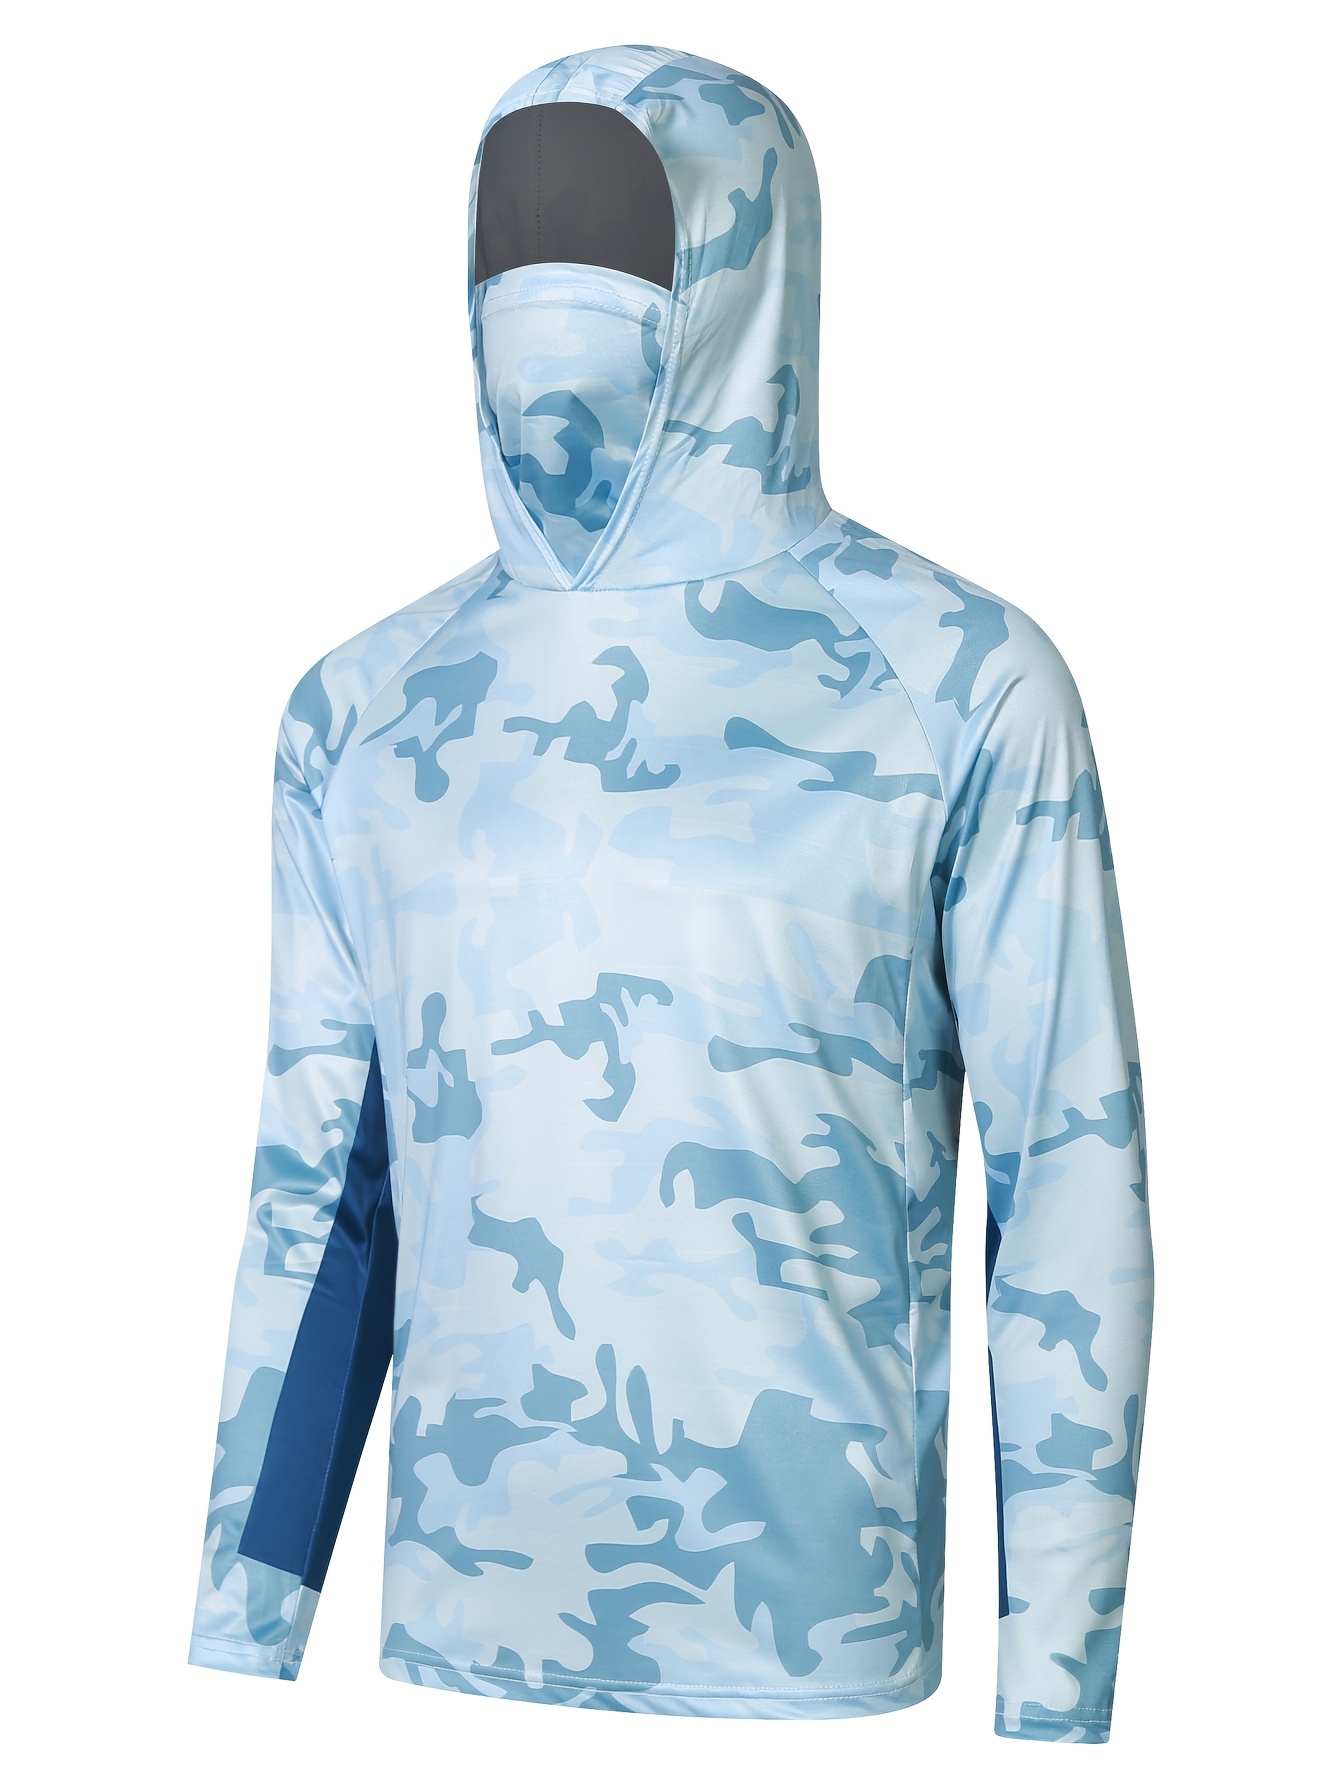 Men's UPF 50+ Sun Protection Hooded Shirt With Mask, Active Blue Camo Quick Dry Slightly Stretch Long Sleeve Rash Guard For Fishing Hiking Cycling